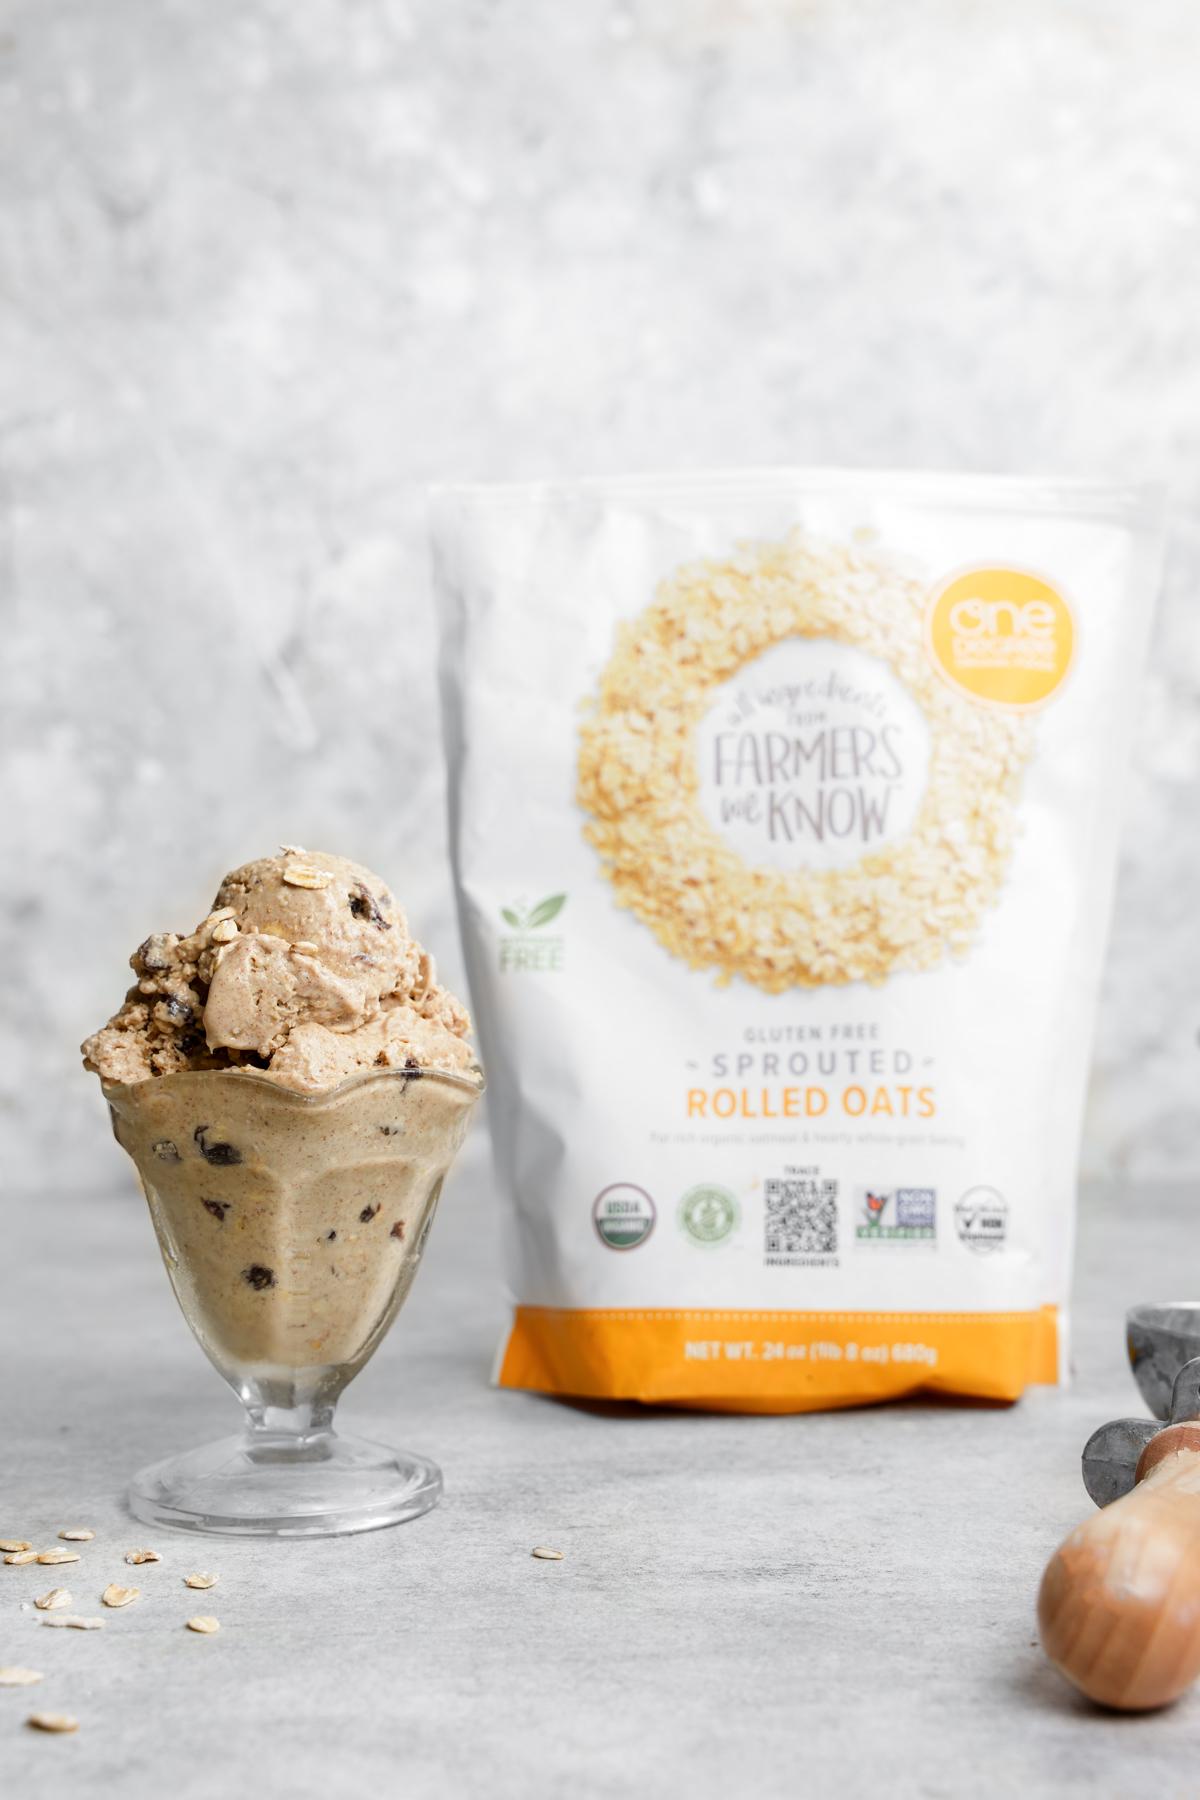 the oatmeal raisin ice cream next to the one degree organics packaging